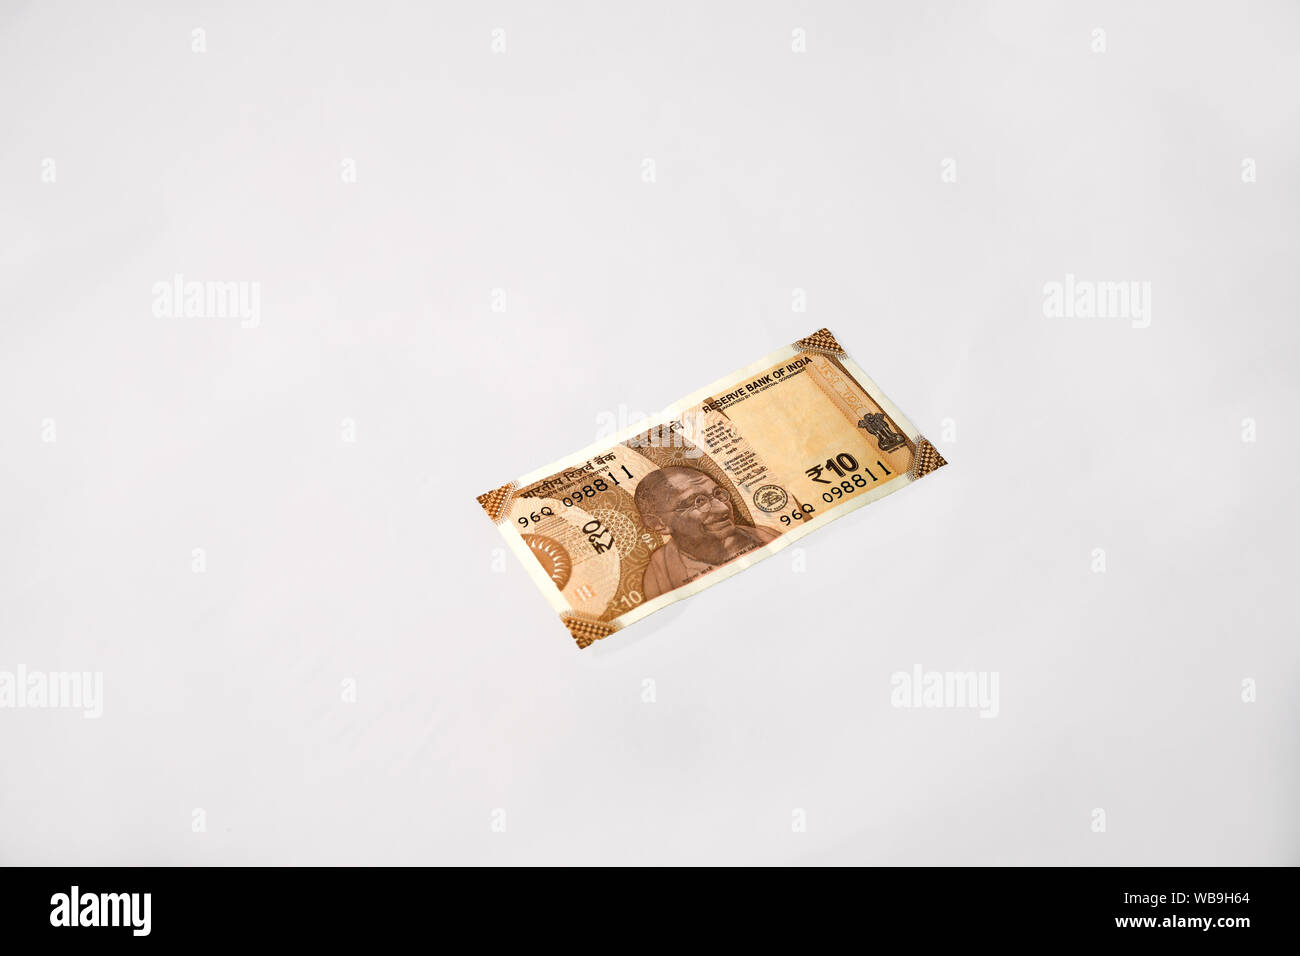 New Indian Ten Rupee Currency Note Stock Photo